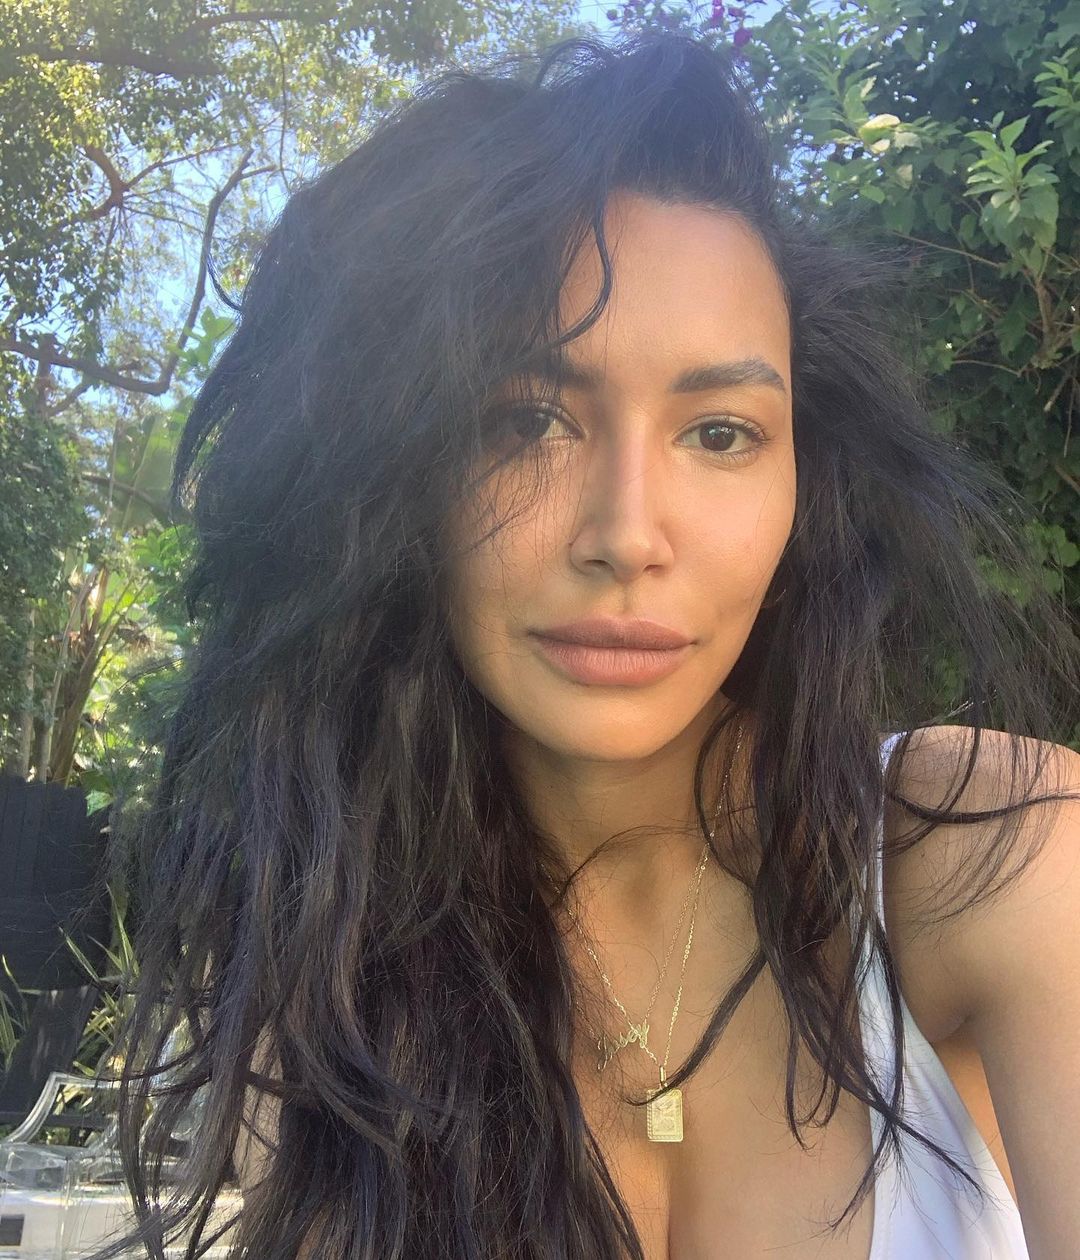 naya-rivera-body-found-murderers-charged-lovren-contract-extension-latest-news-global-world-stories-tuesday-july-2020-style-rave